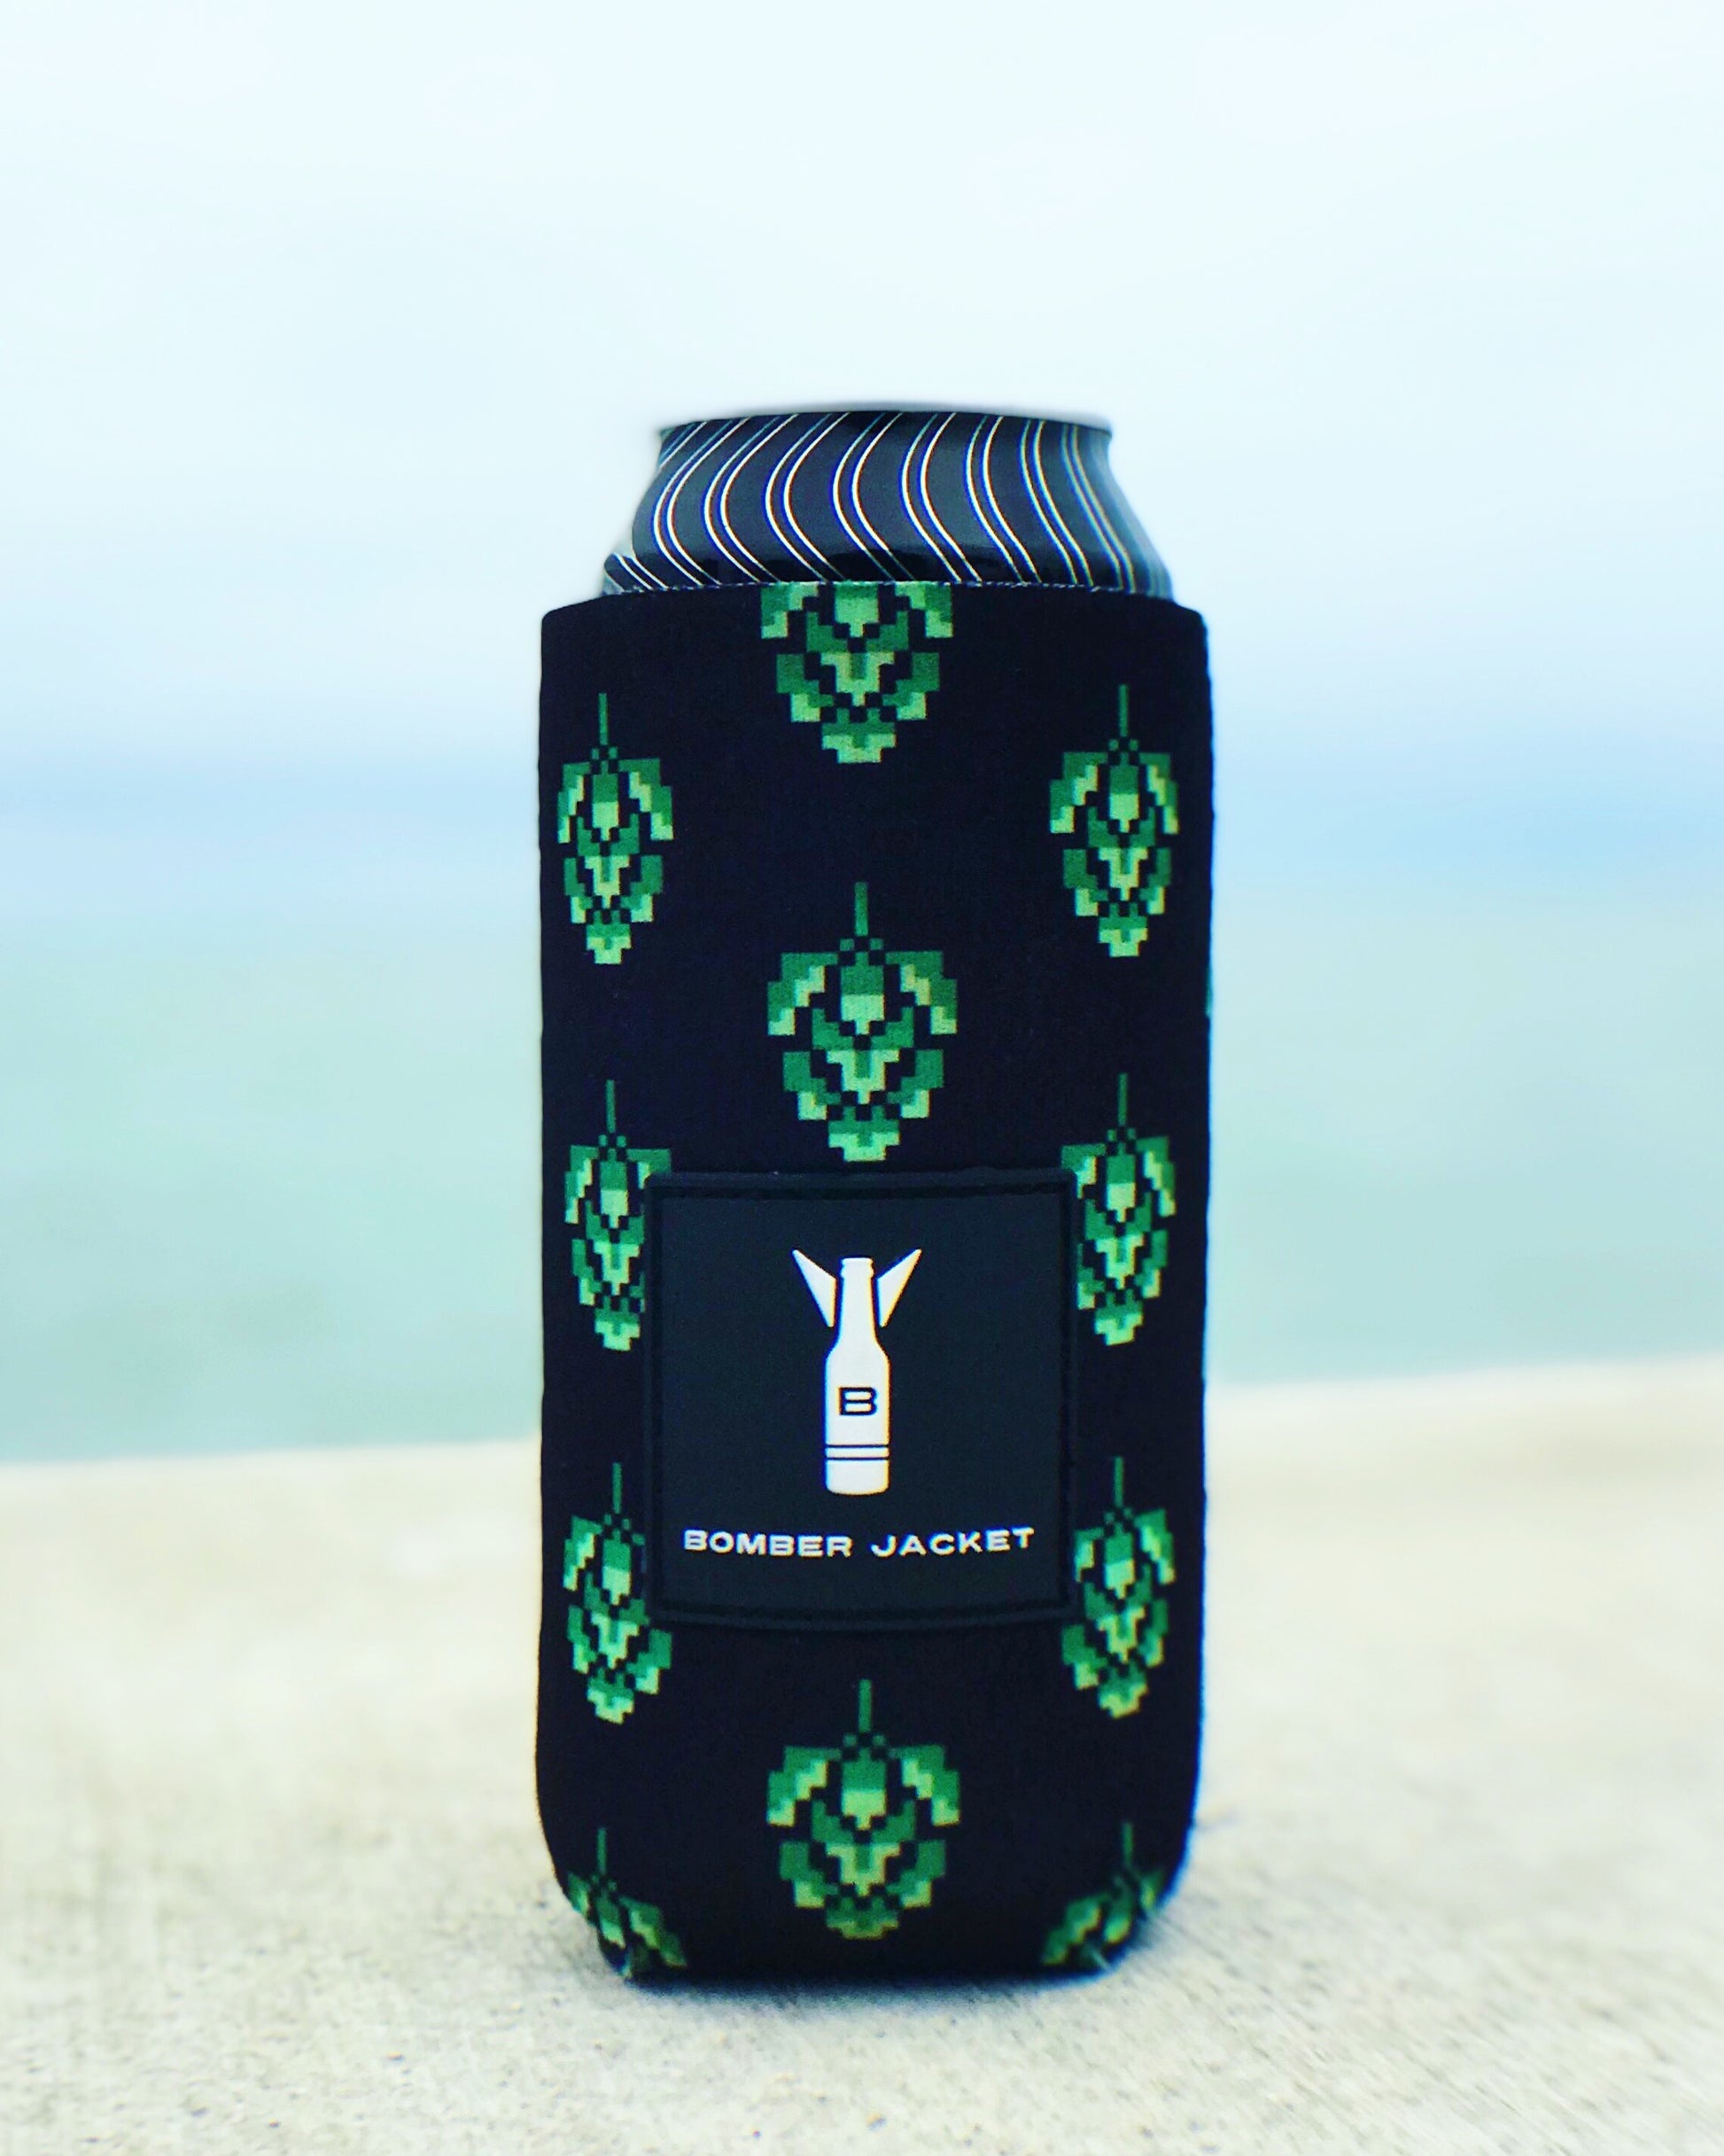 C-16 Stag Beer | Premium 16 oz tall can insulator